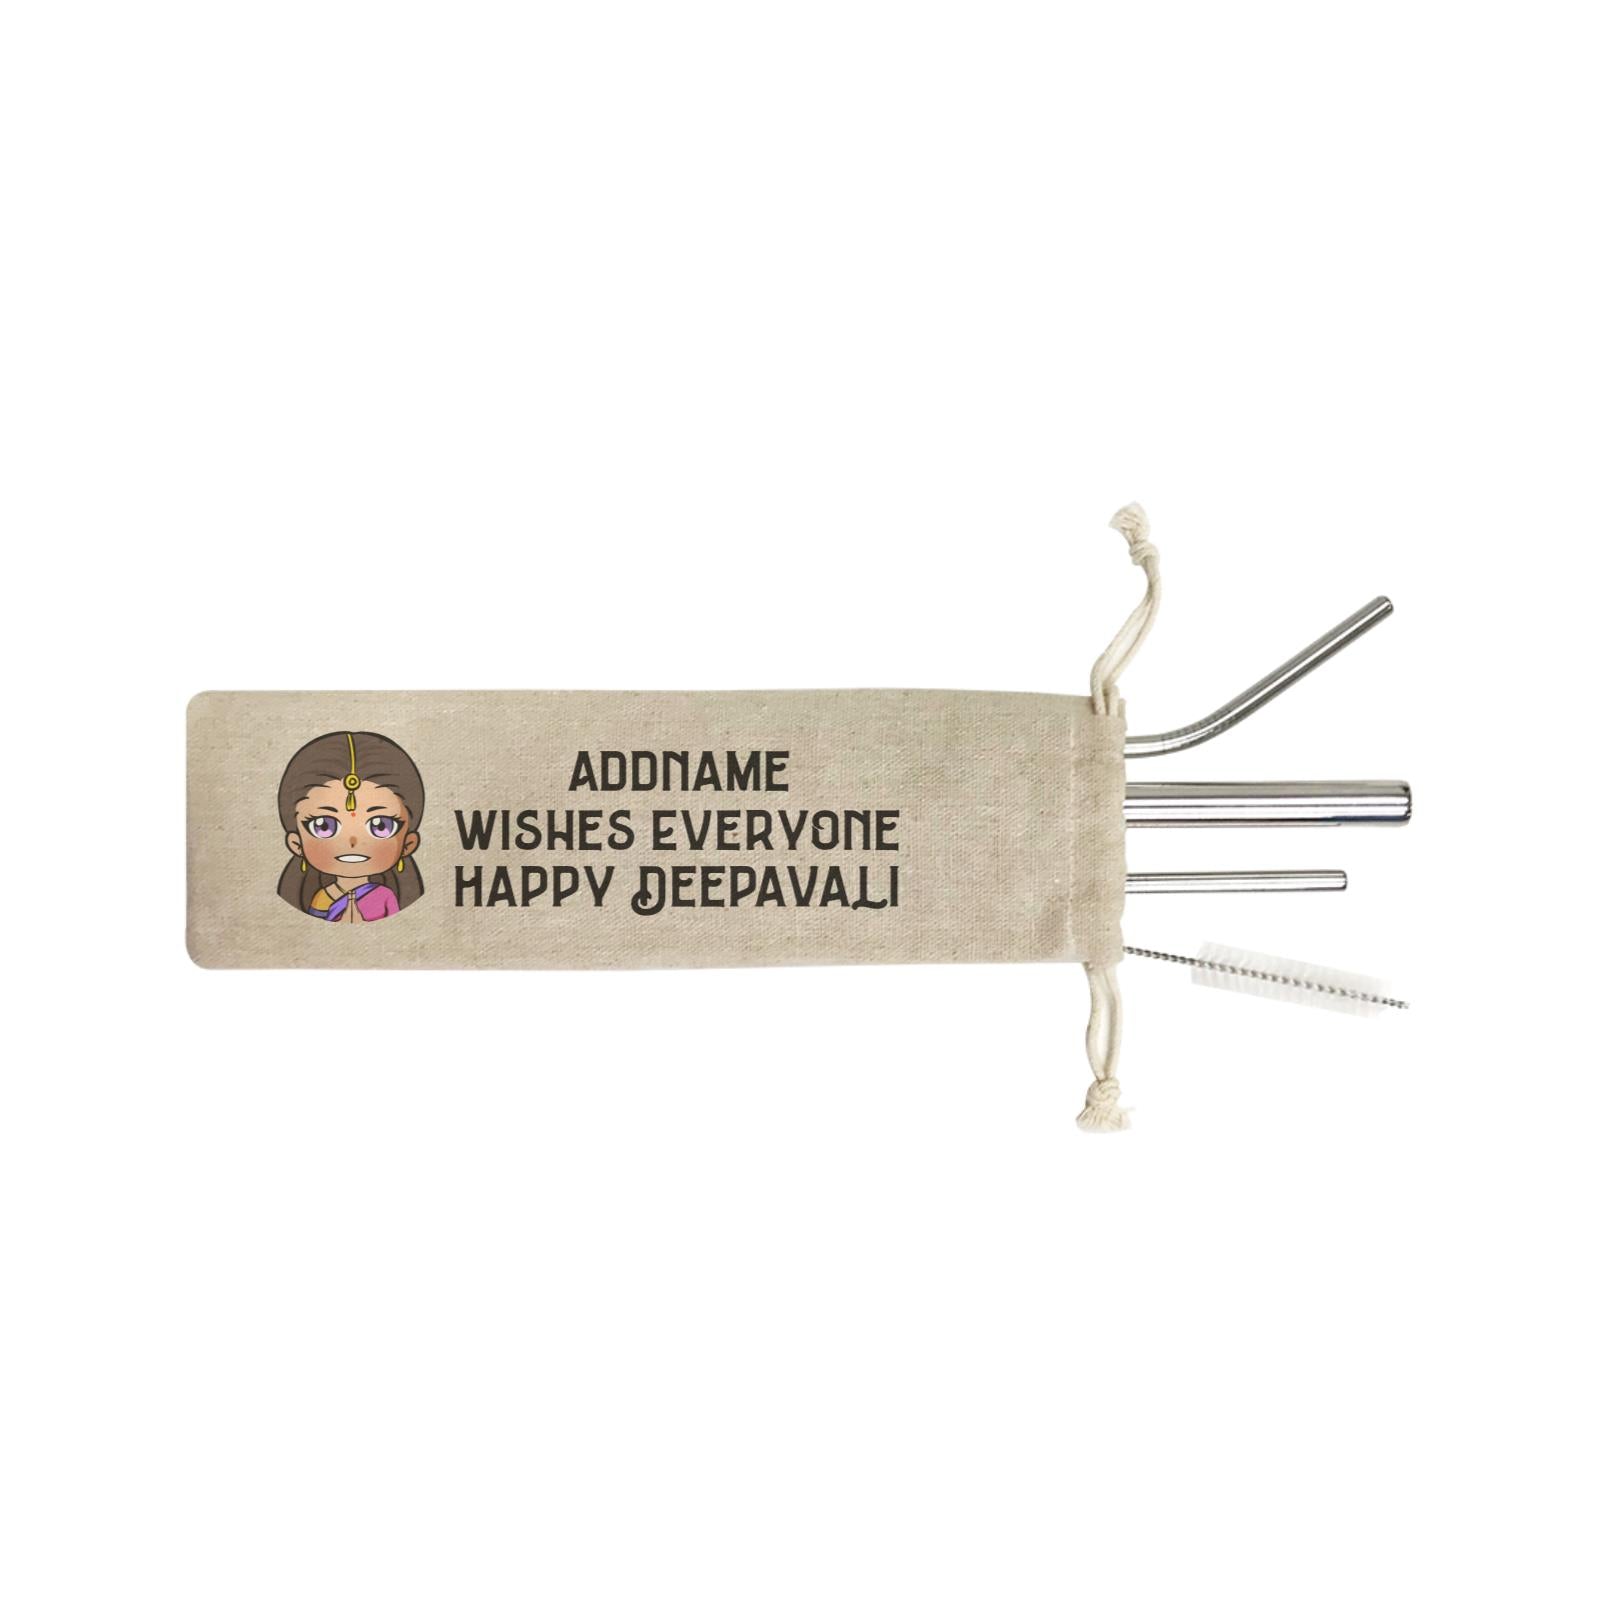 Deepavali Chibi Woman Front Addname Wishes Everyone Deepavali SB 4-In-1 Stainless Steel Straw Set in Satchel